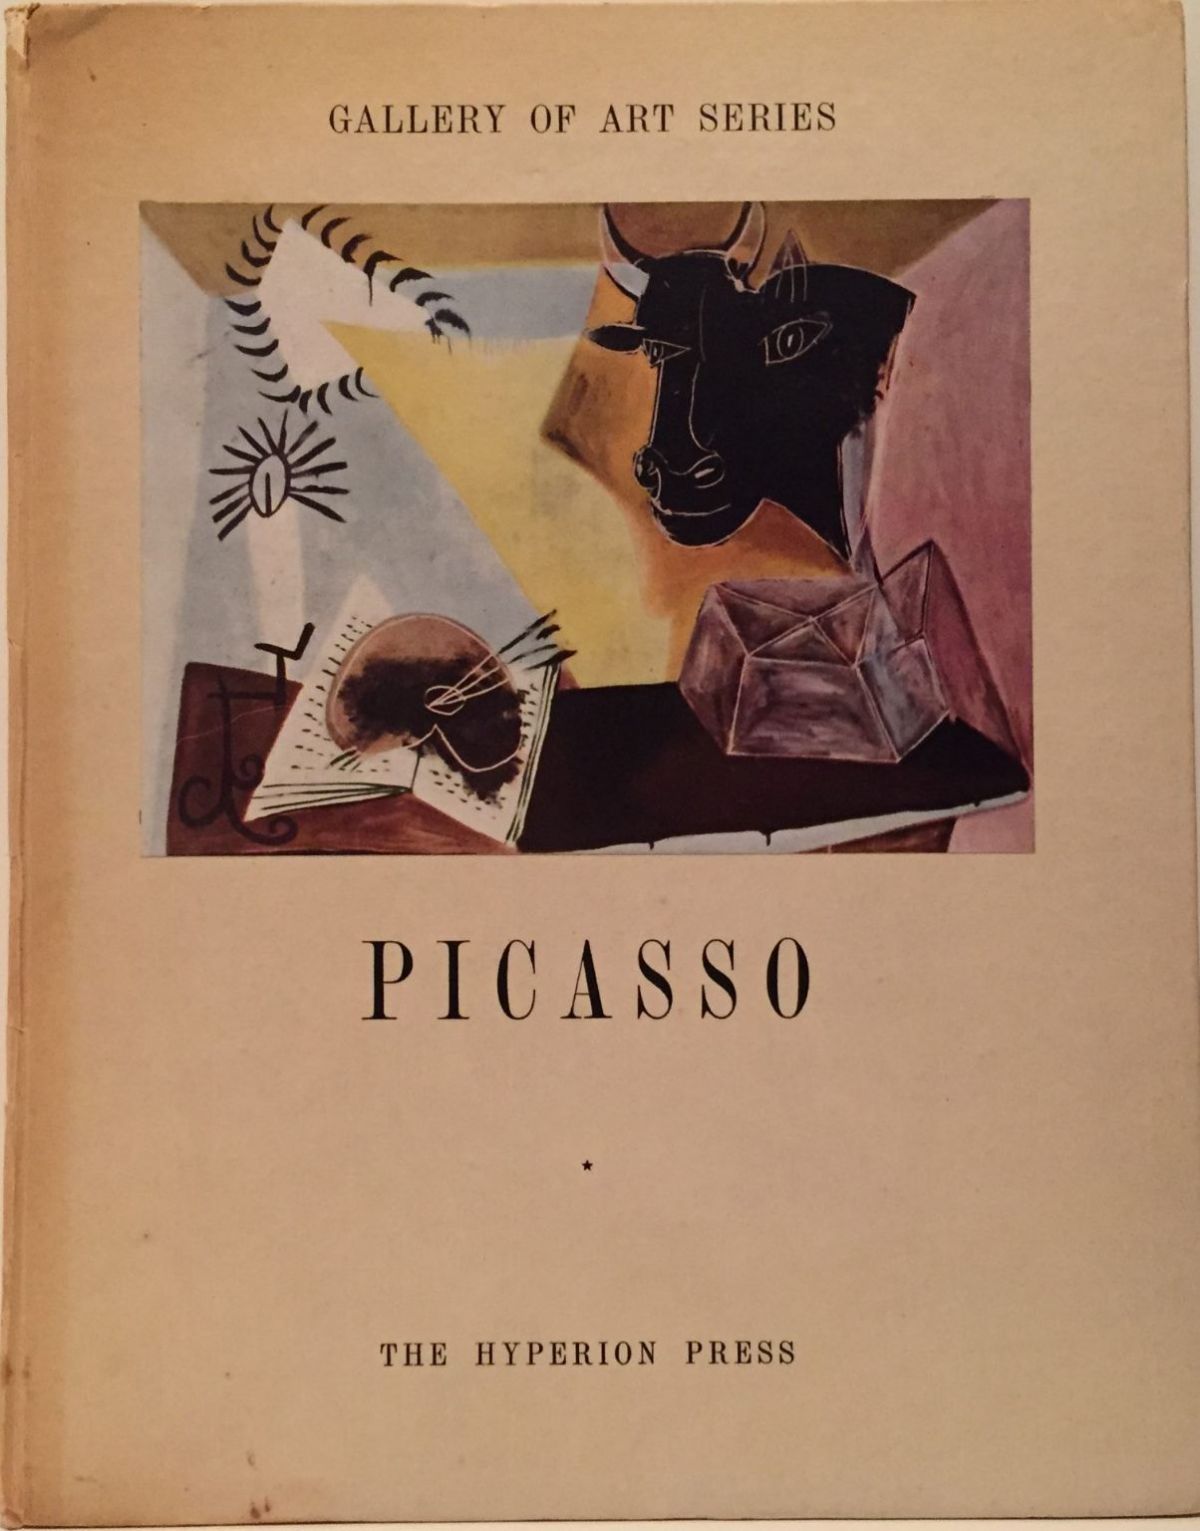 PICASSO: Gallery of Art Series